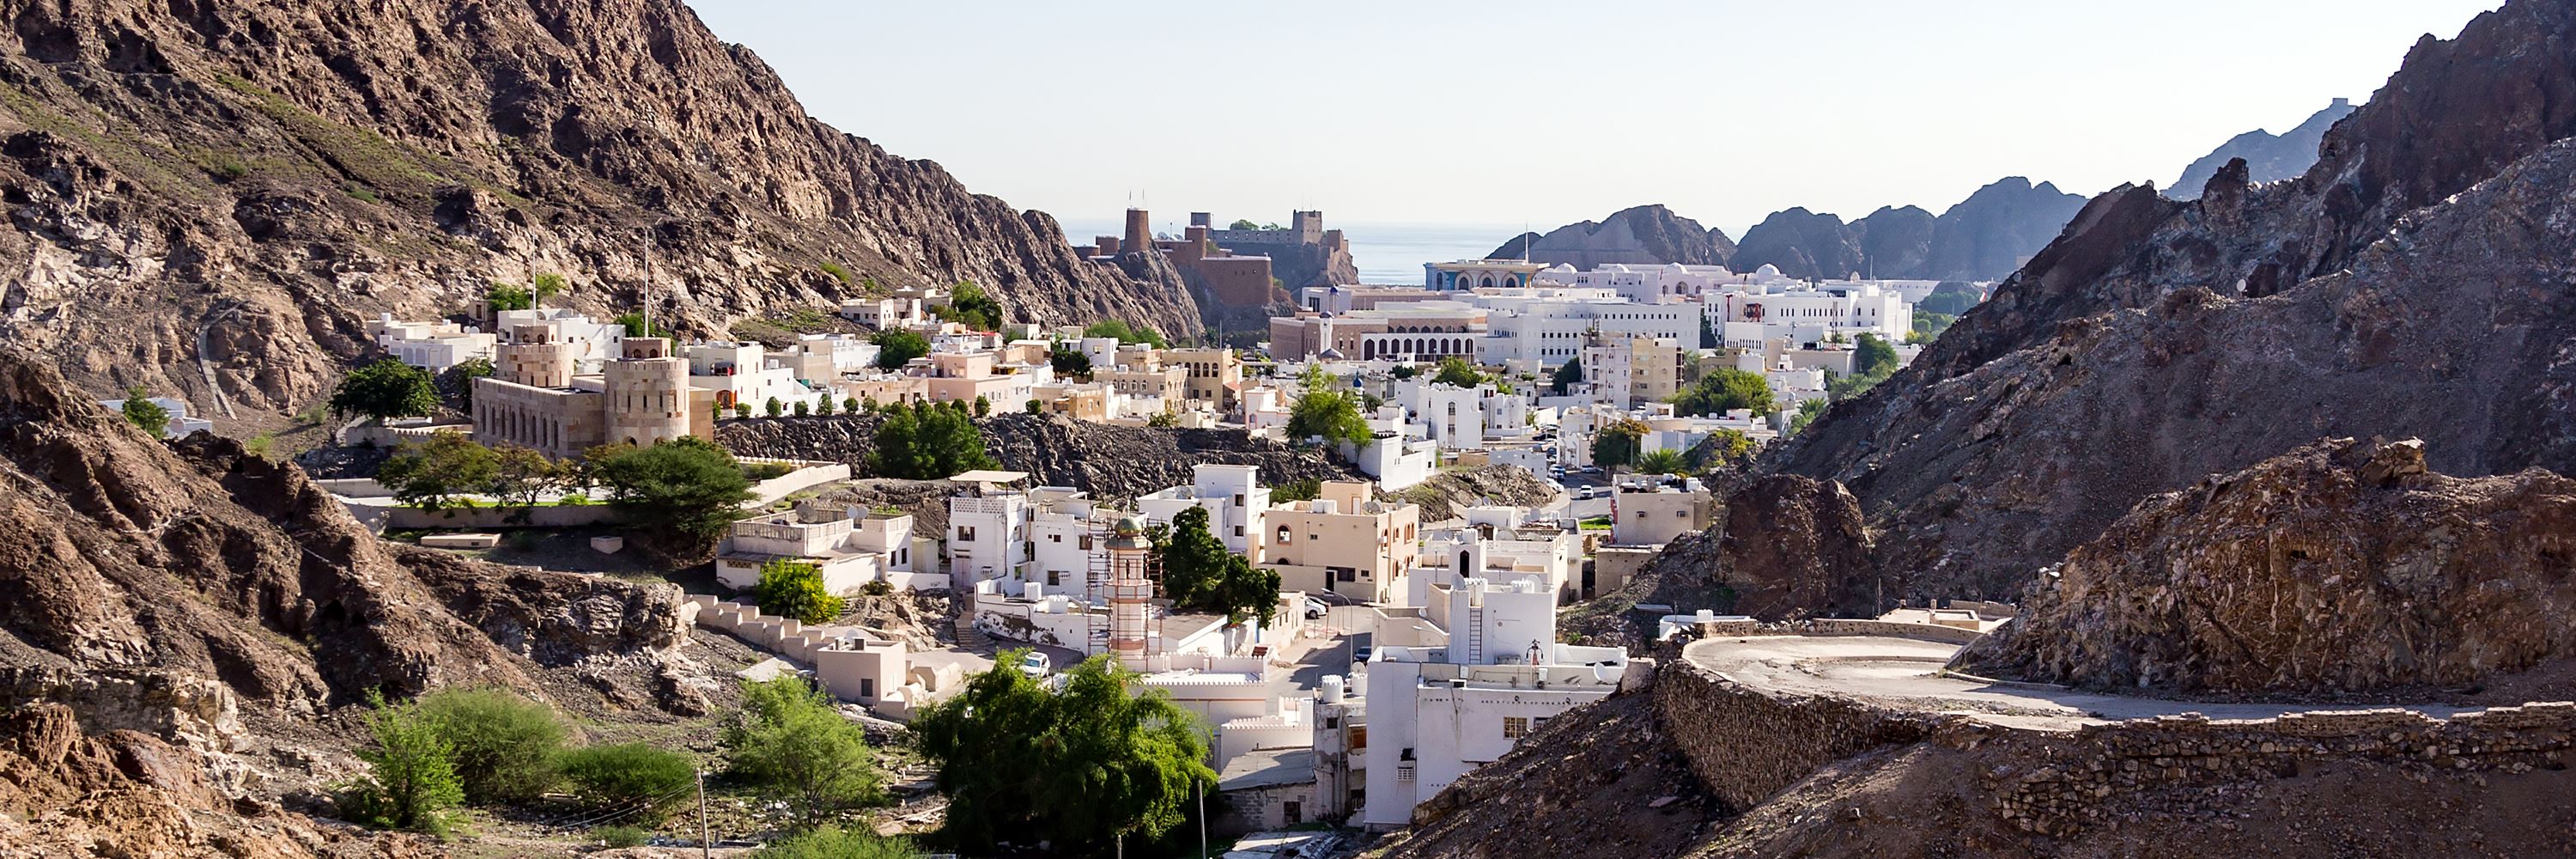 Oman for the first time visitor | Audley